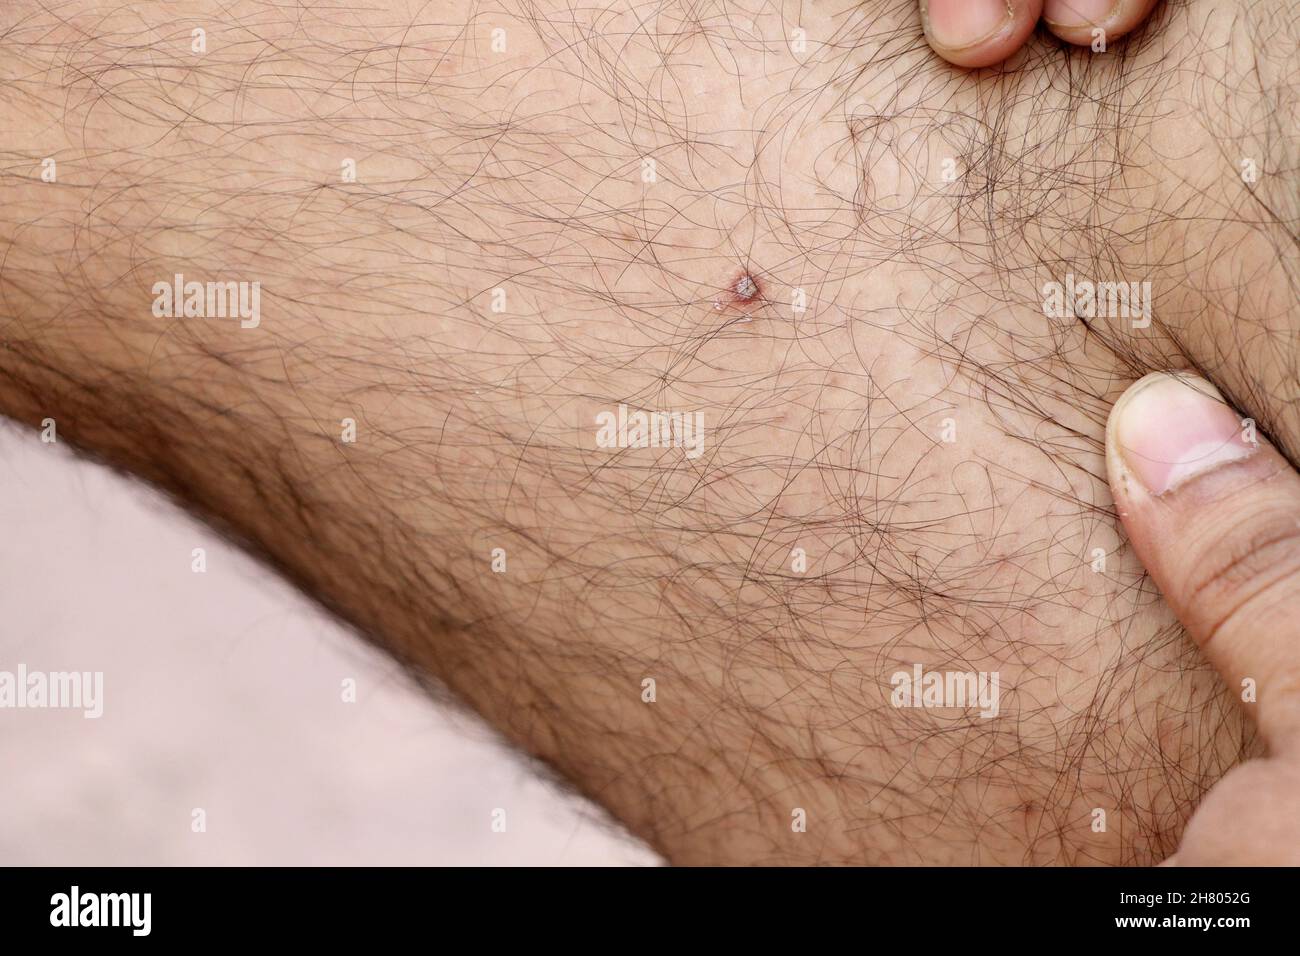 A closup of pimple on man's thigh Stock Photo